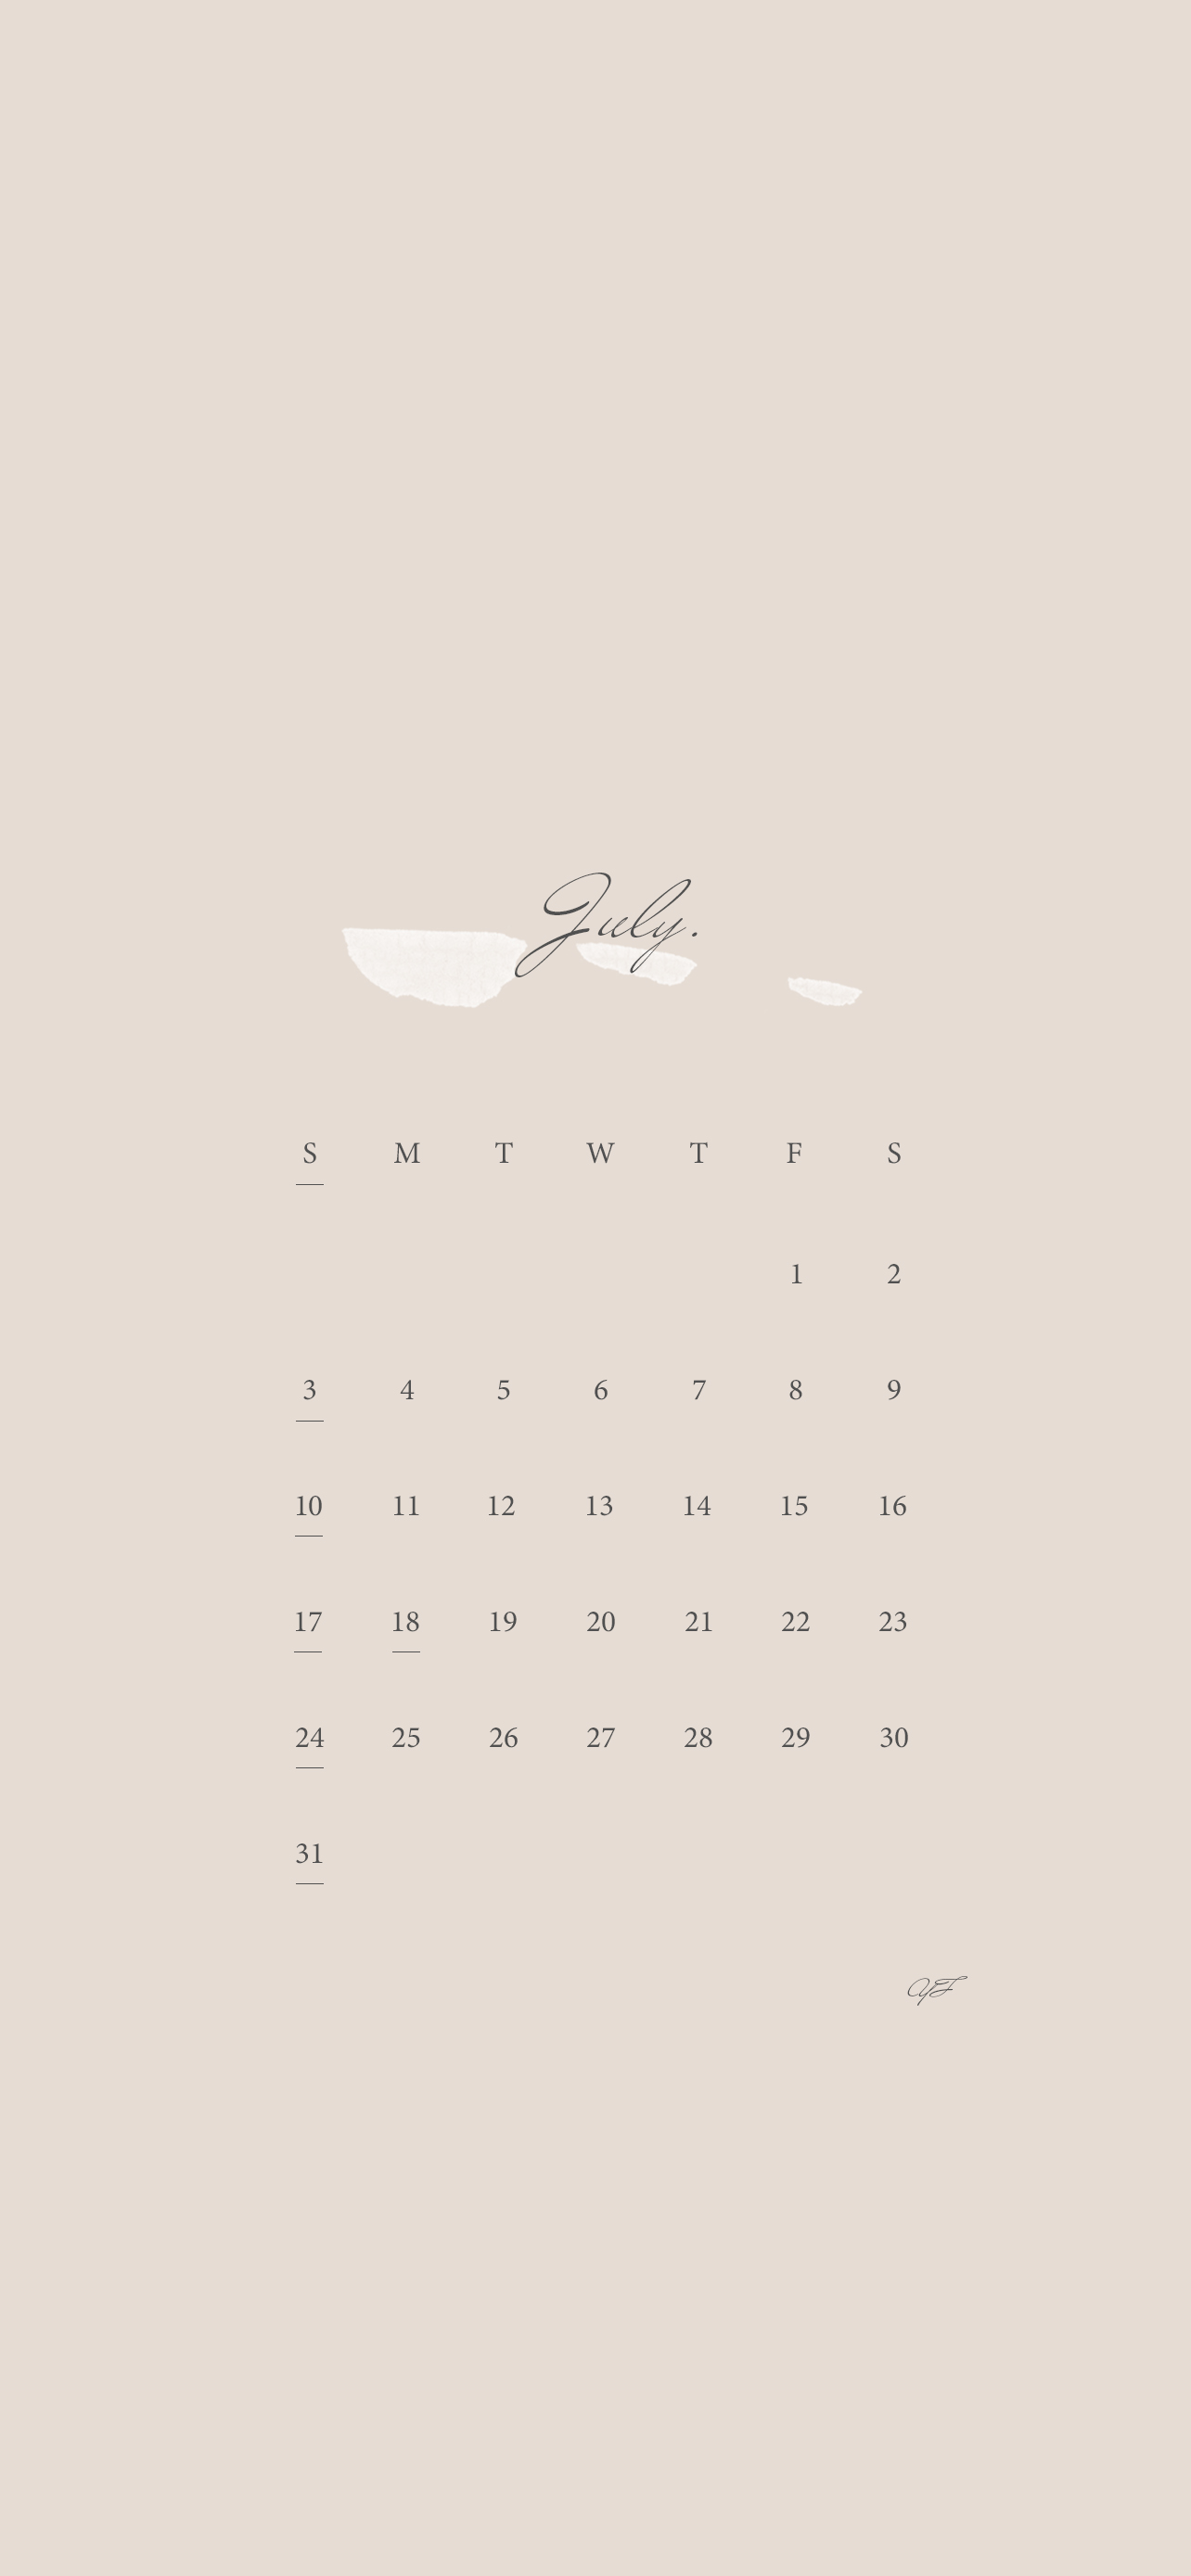 July 22 Calendar Wallpaper For The Iphone Design By Yf